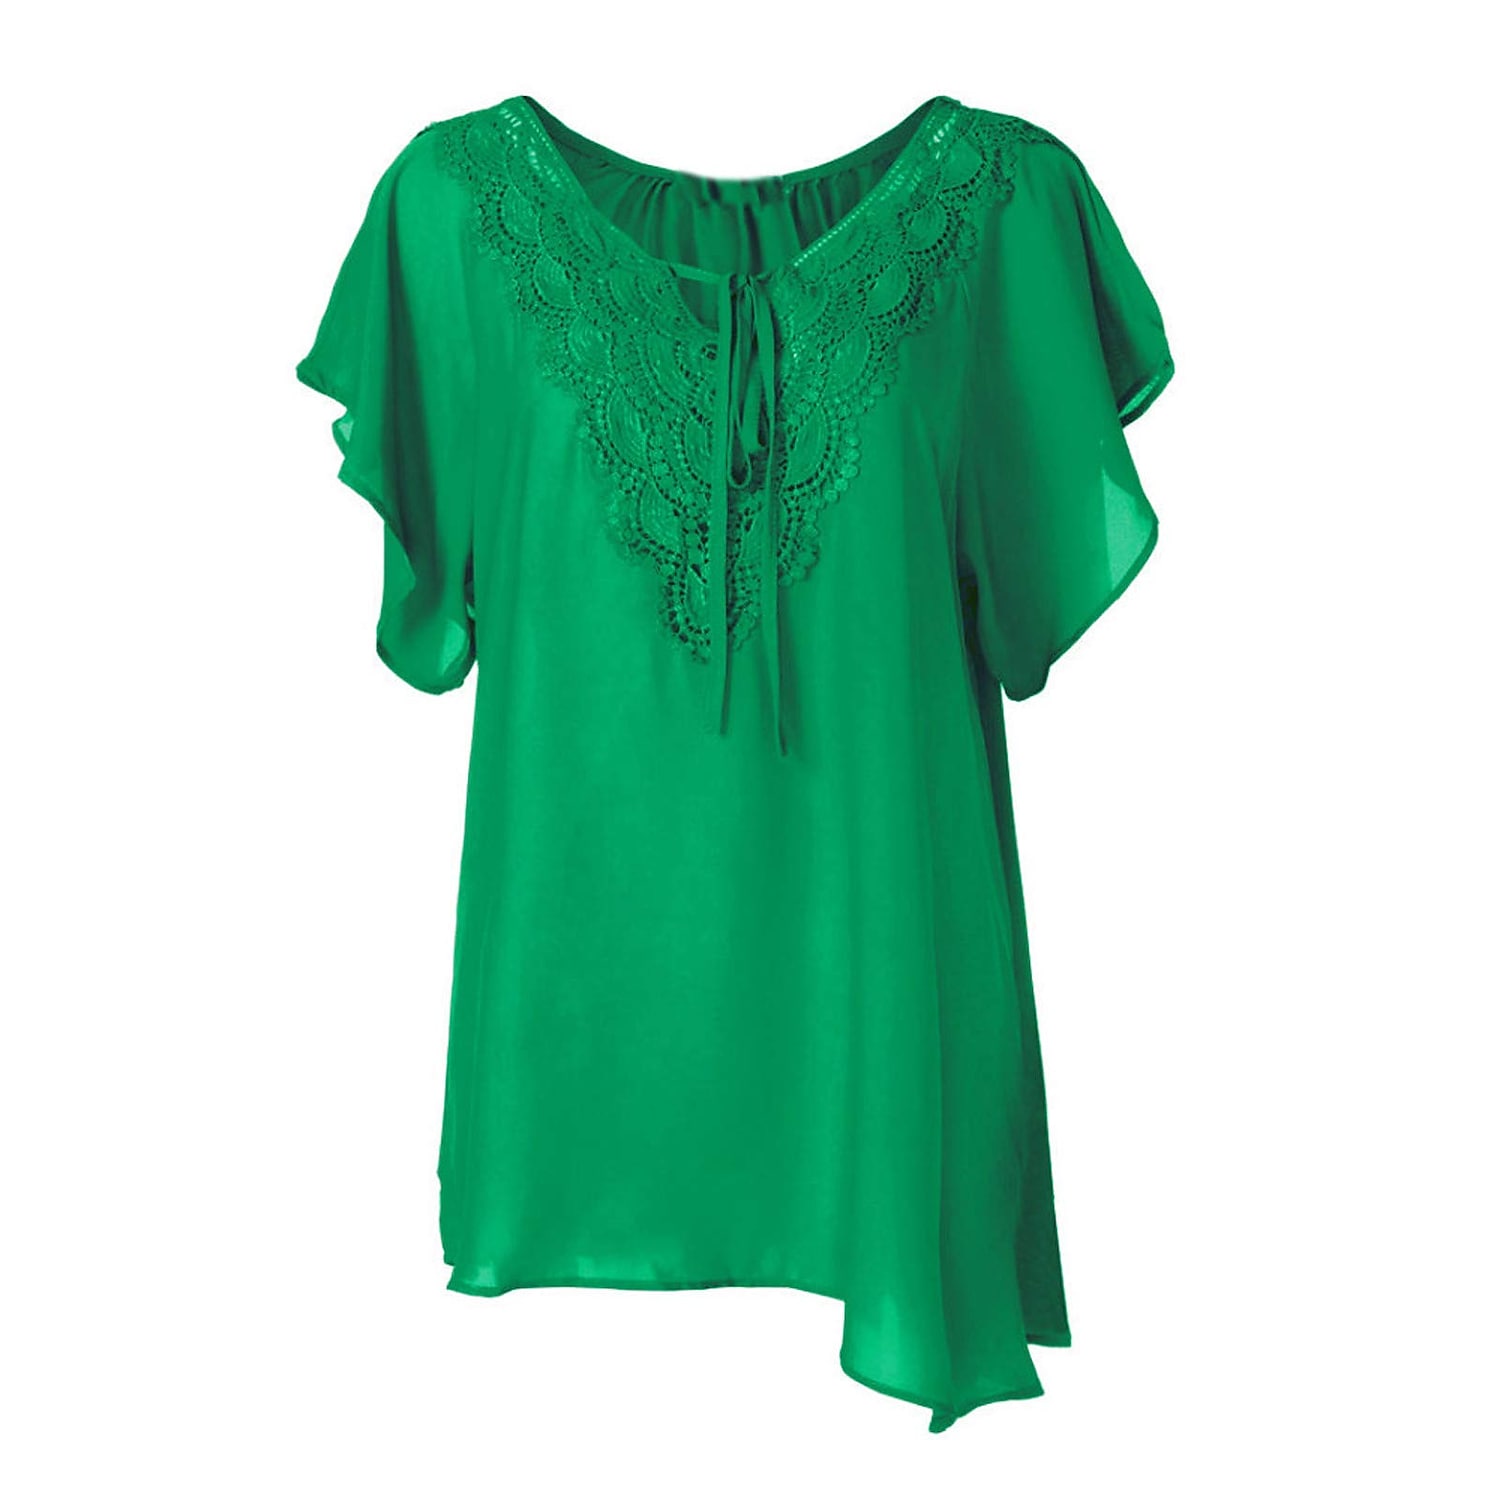 Women's Trumpet-sleeved Short-sleeved T-shirt Lace Stitching Top